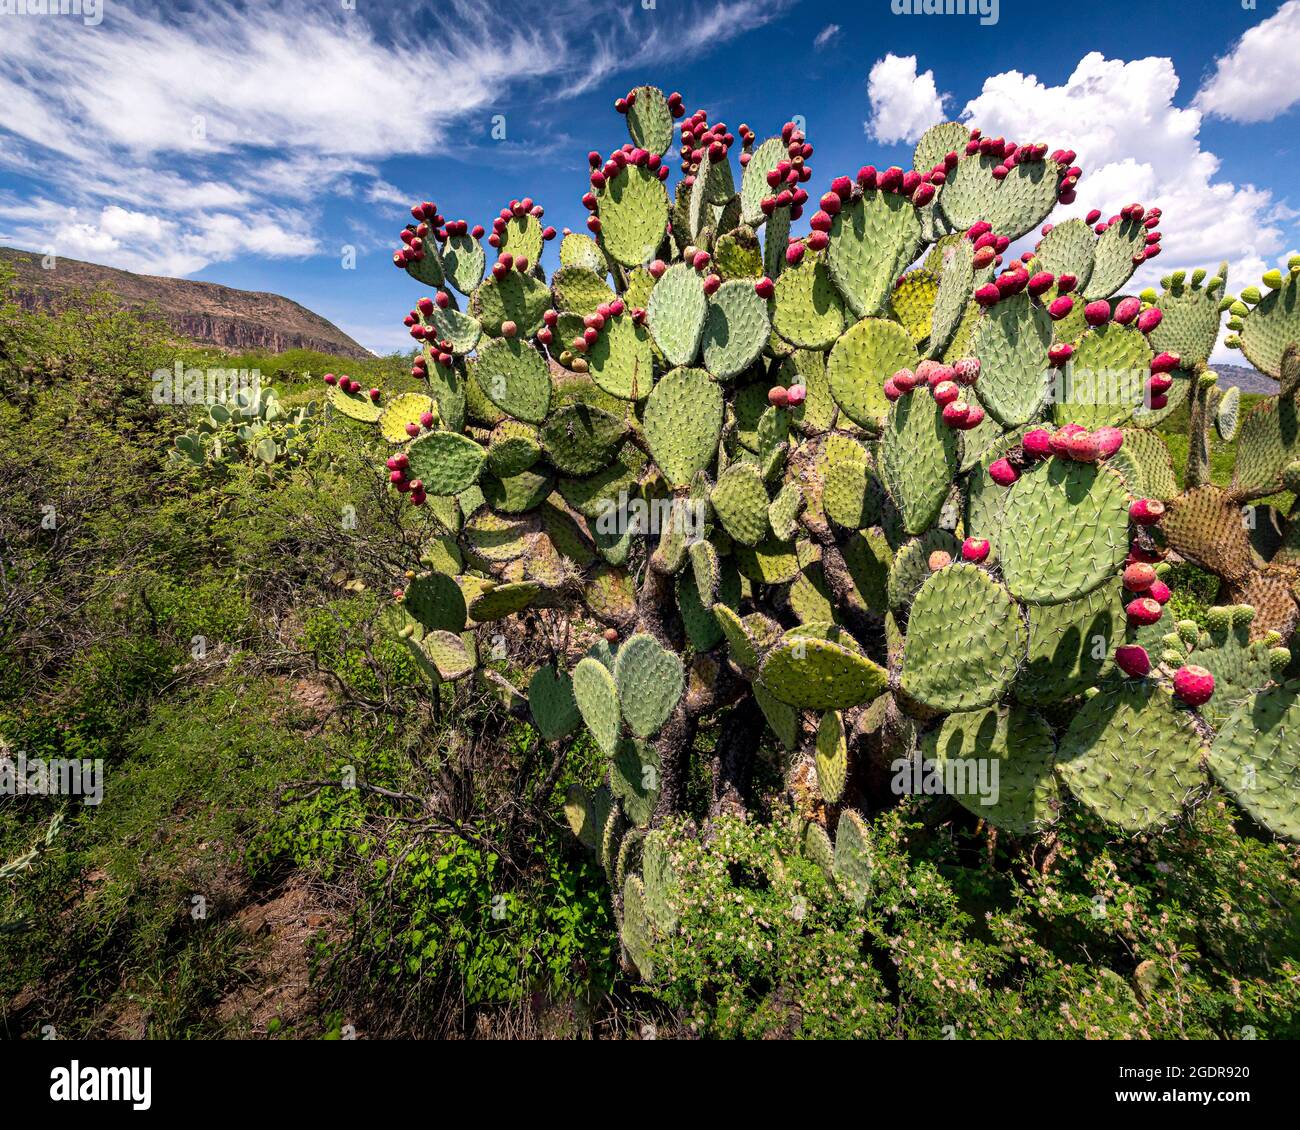 A large Prickly Pear cactus with red fruit in Guanajuato, Mexico. Stock Photo